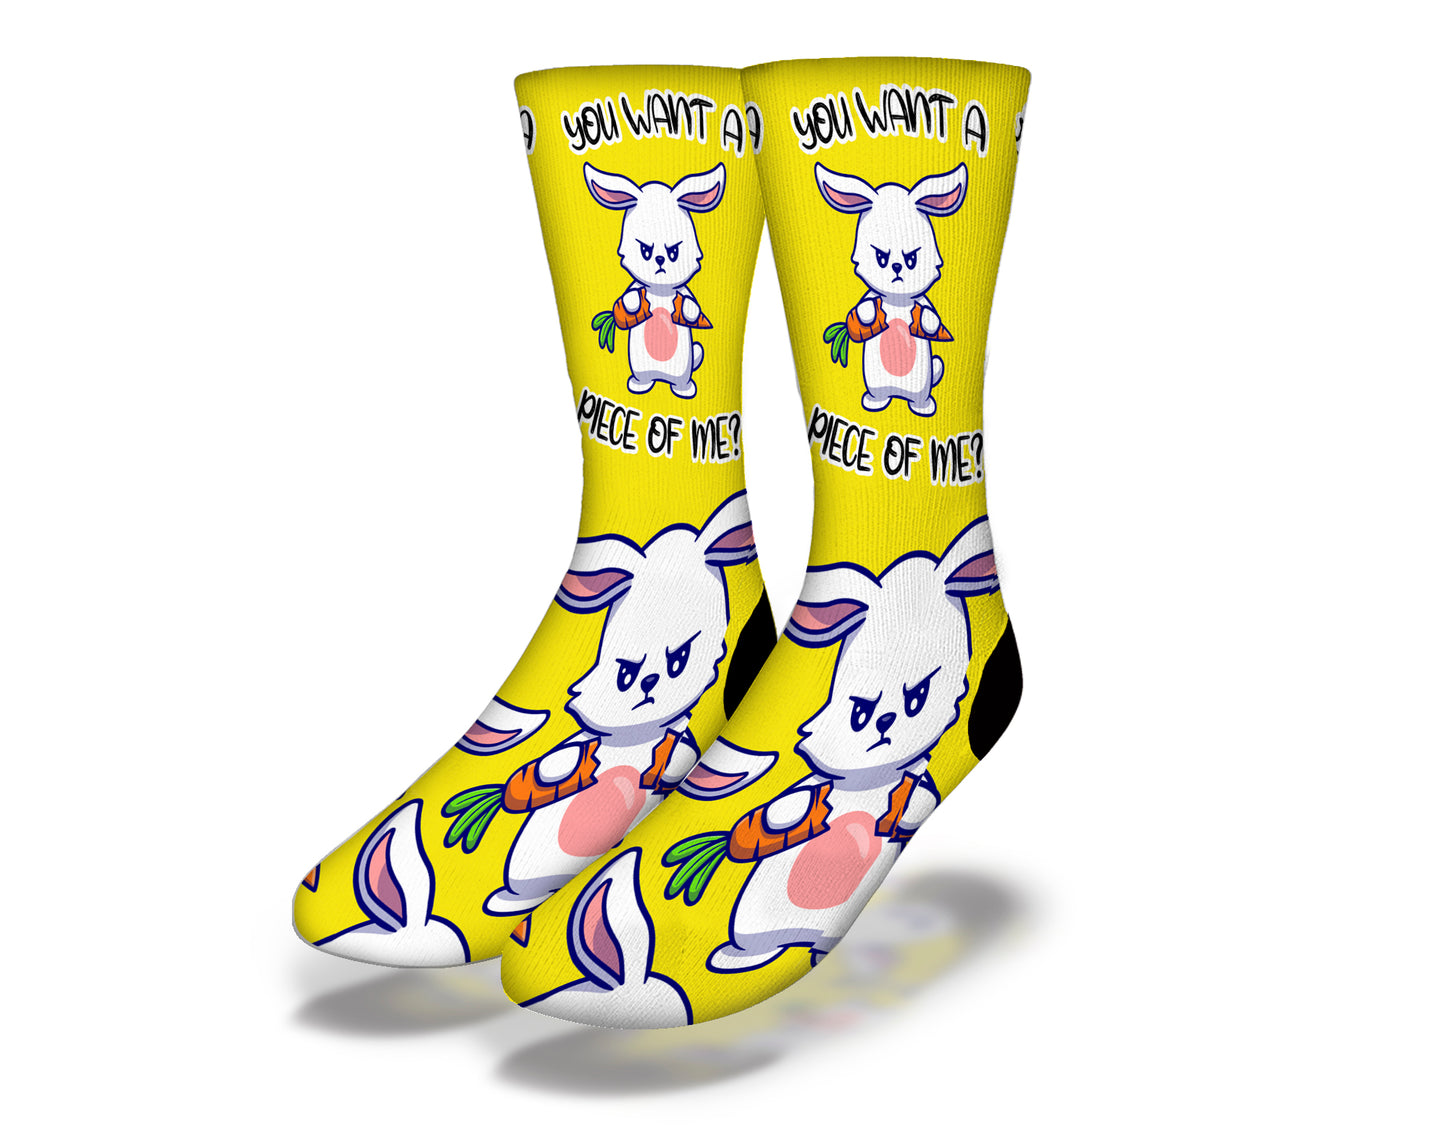 "YOU WANT A PIECE OF ME?" Fun Easter Bunny Socks (Yellow)